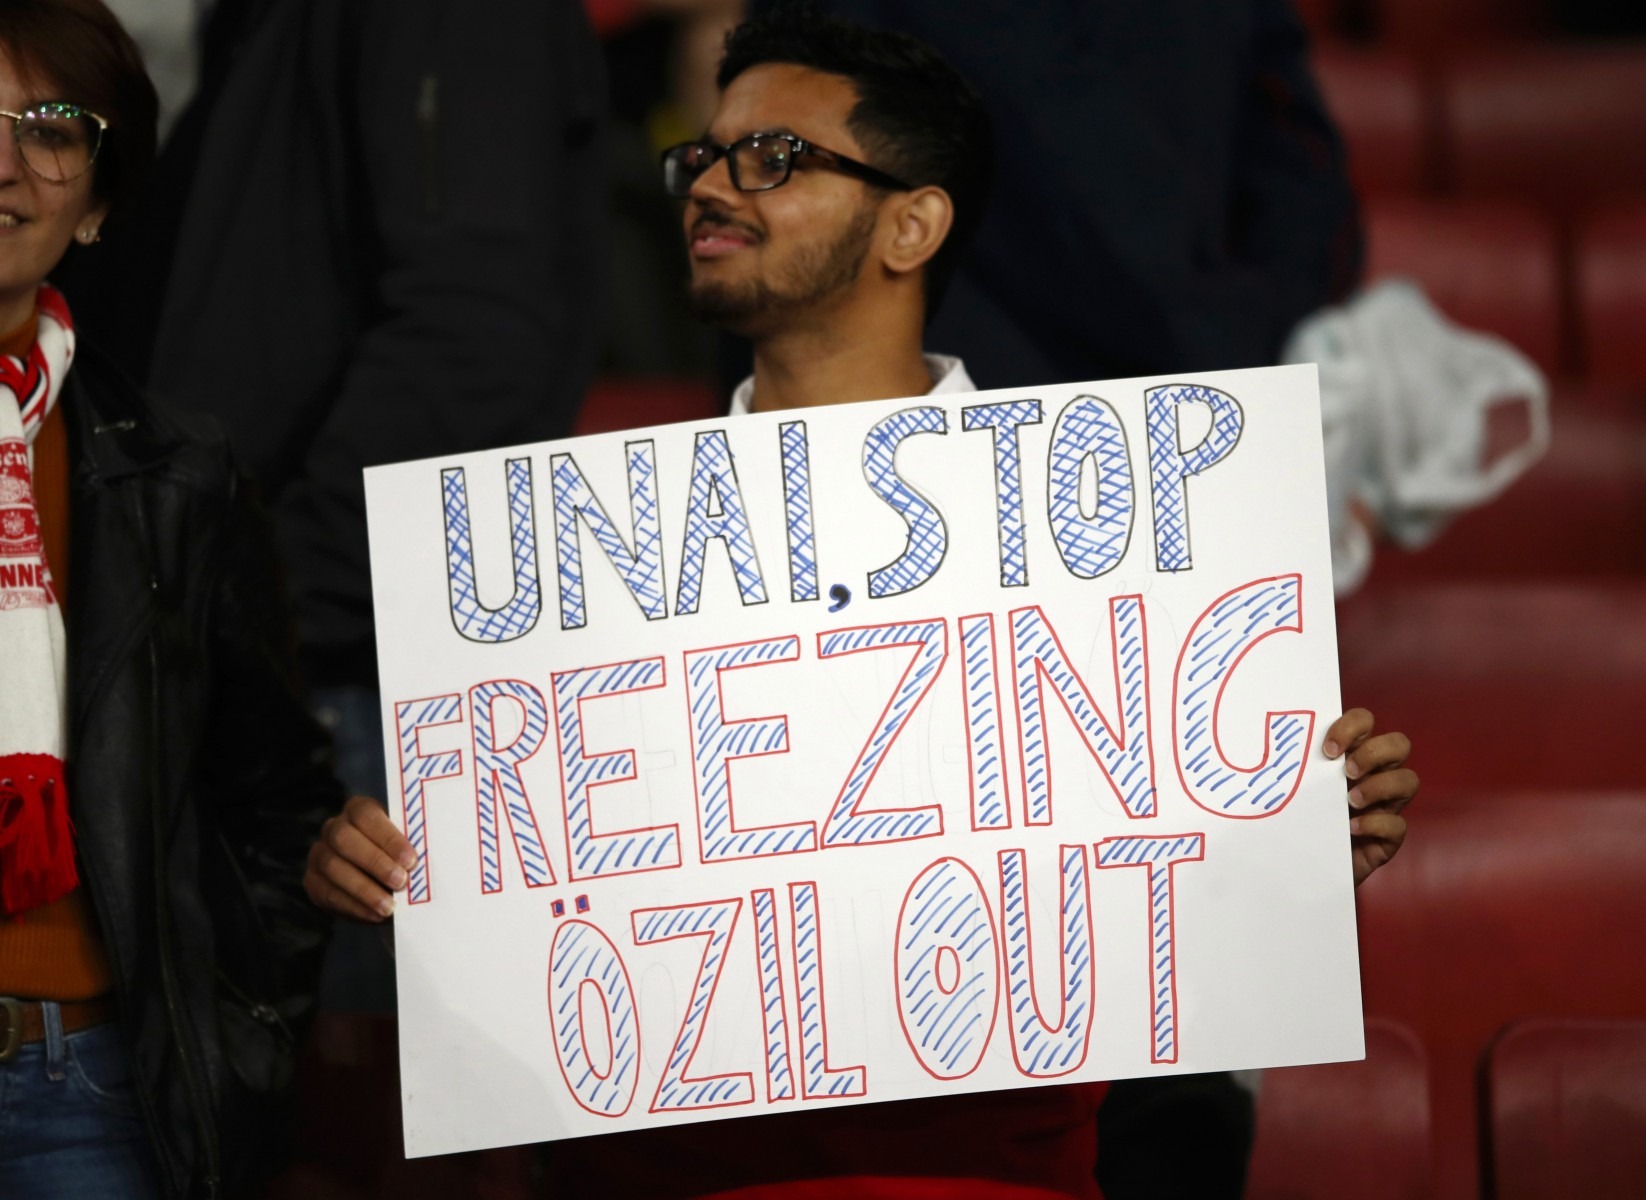 Another sign was in support of Mesut Ozil, who was left out of the matchday squad once again